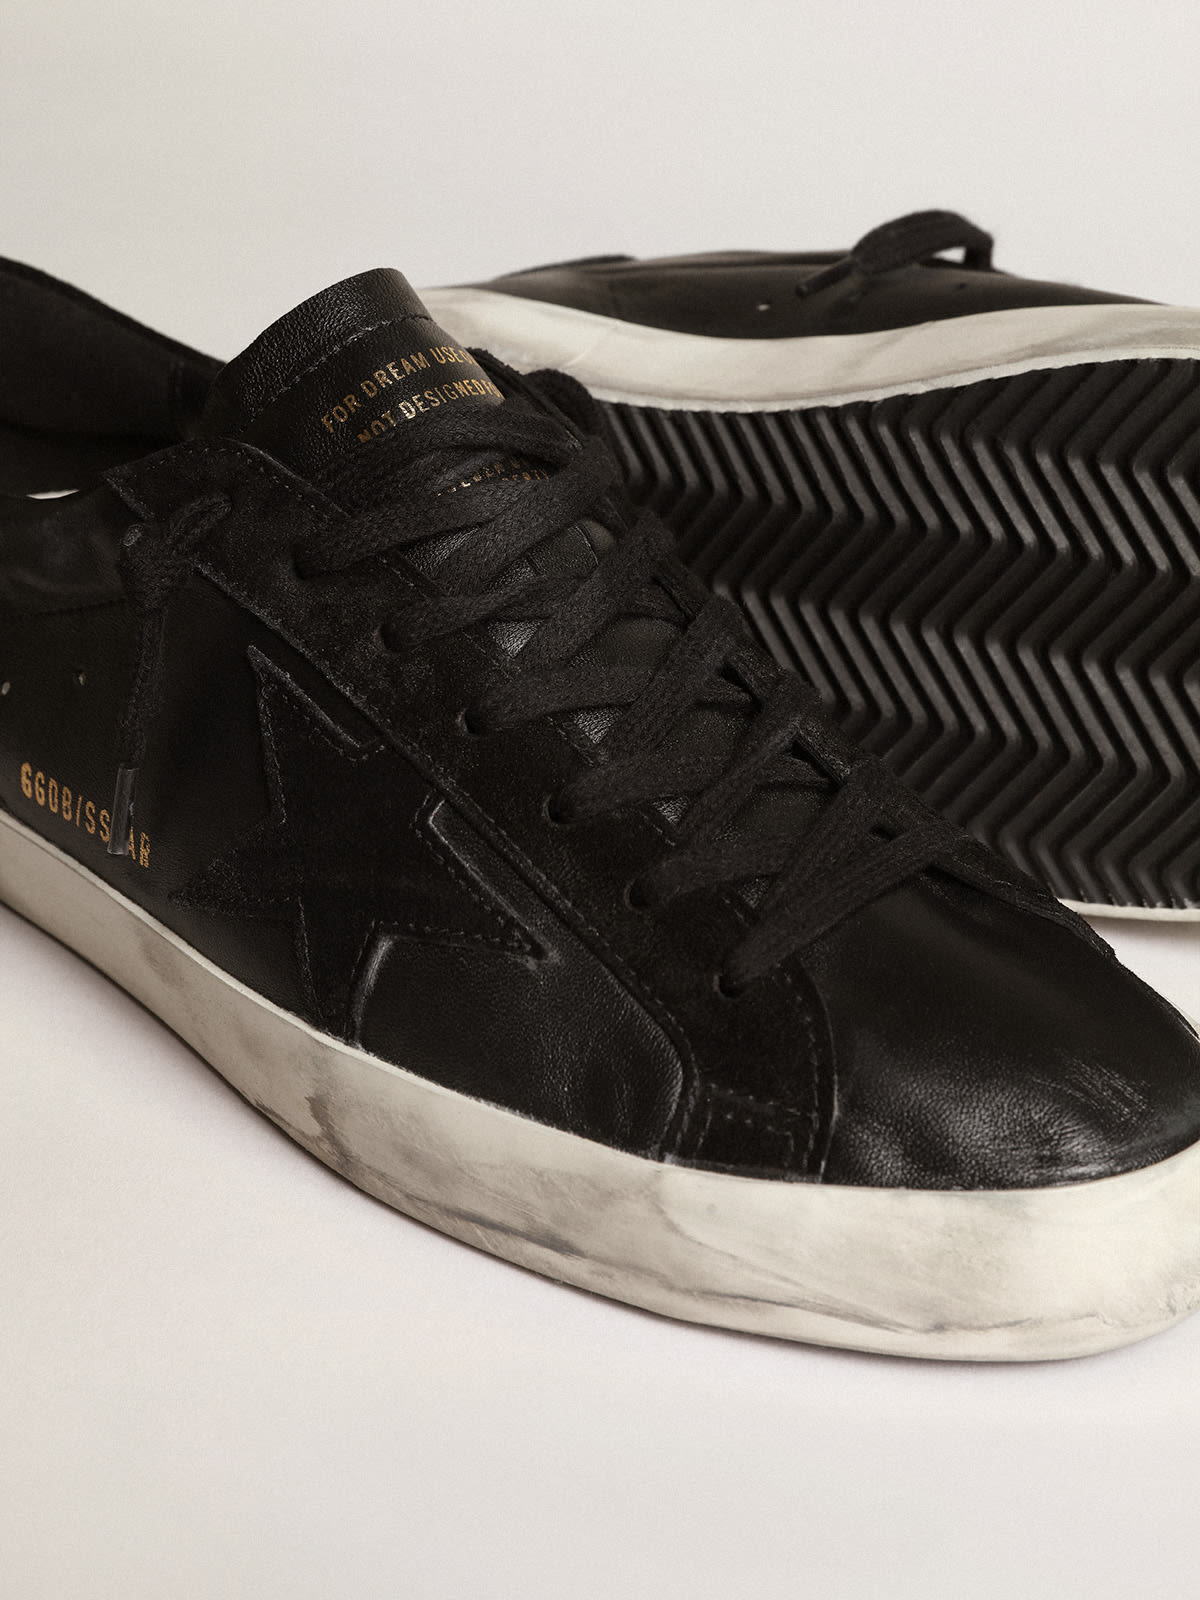 Golden Goose - Super-Star in black nappa with black suede star and heel tab in 